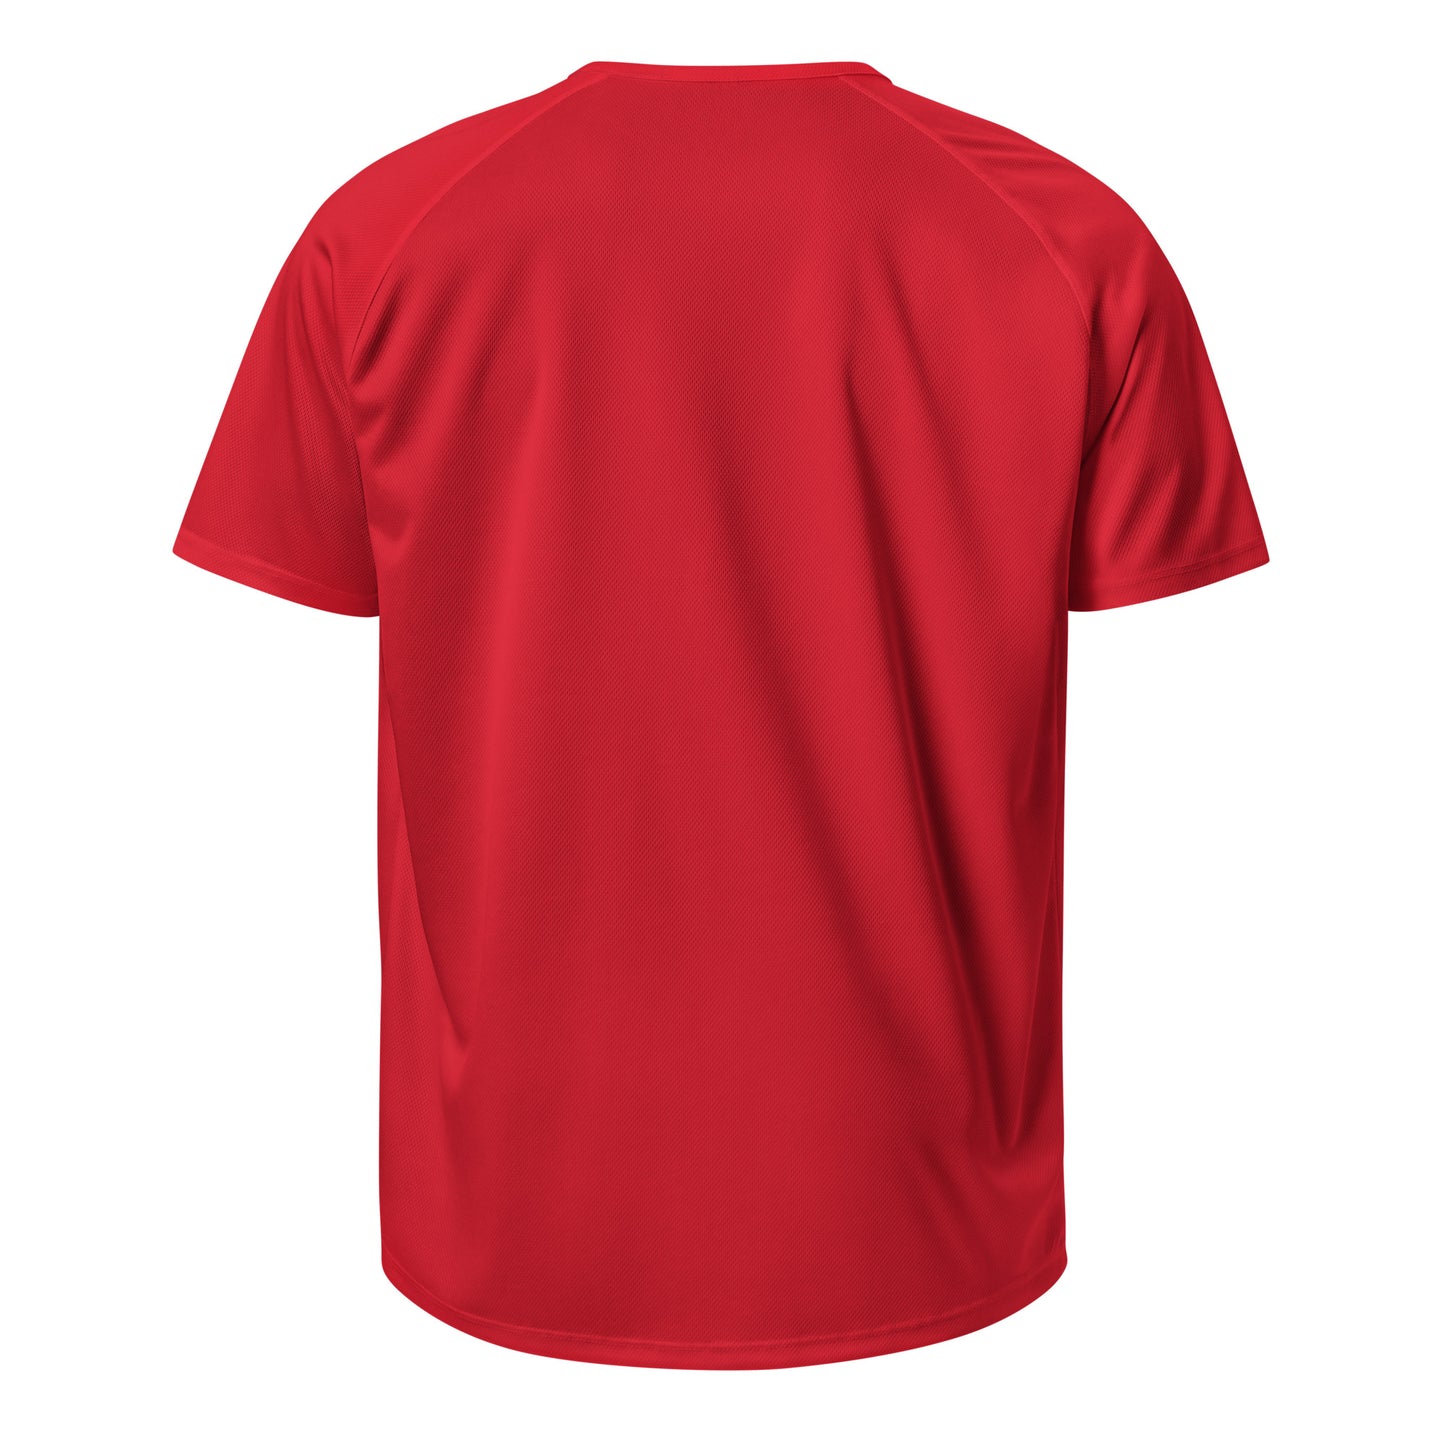 E124 - Sports/Breathable Fabric (Universal jump/woman : Red)